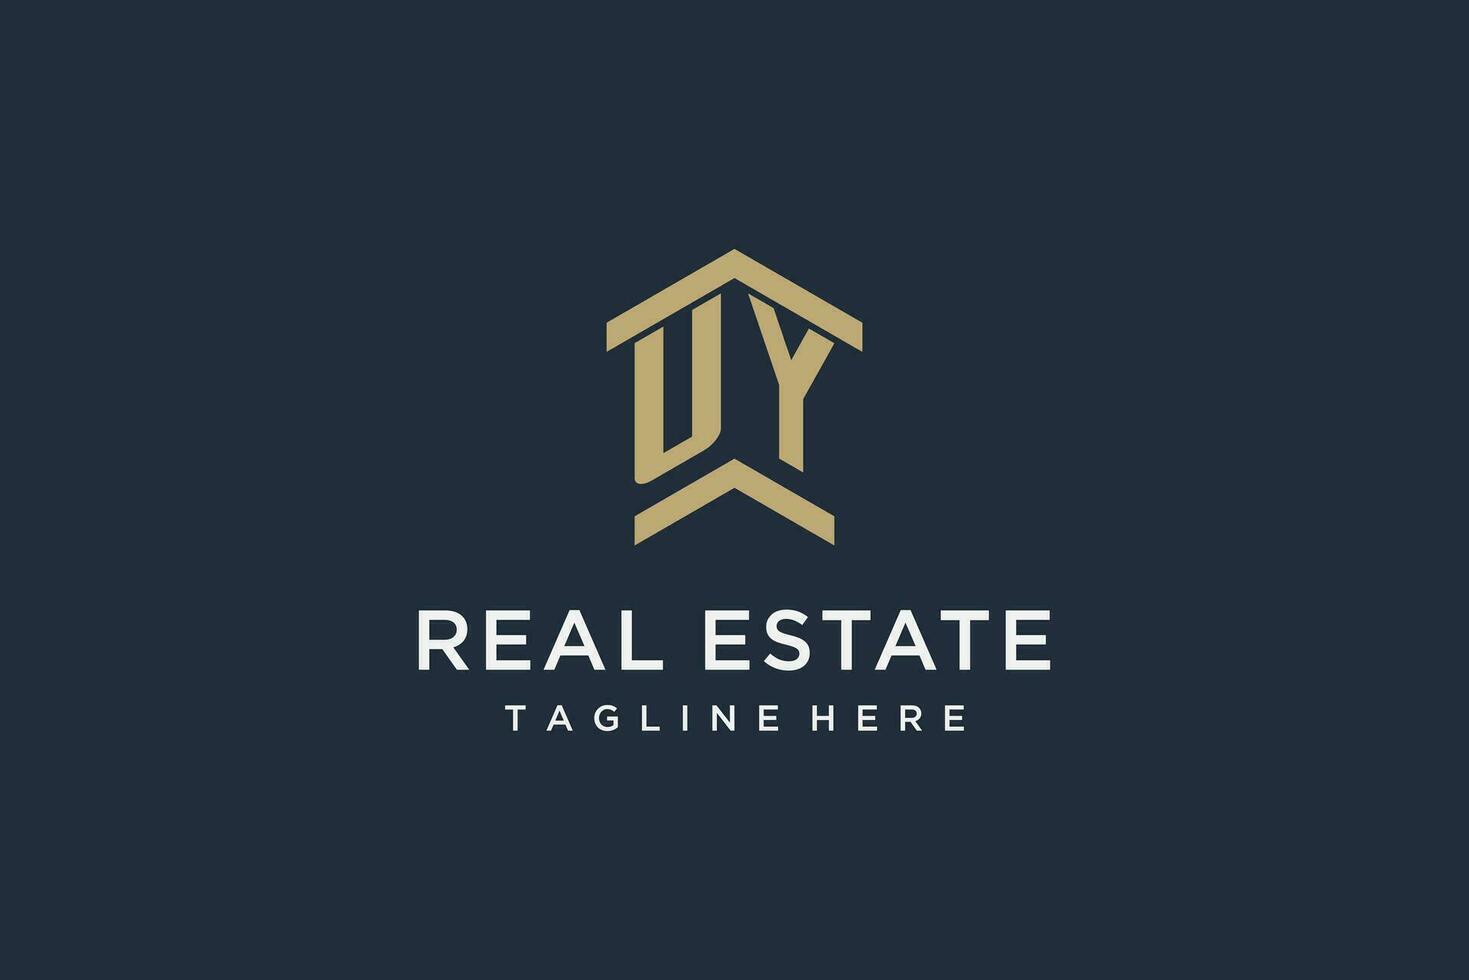 Initial UY logo for real estate with simple and creative house roof icon logo design ideas vector